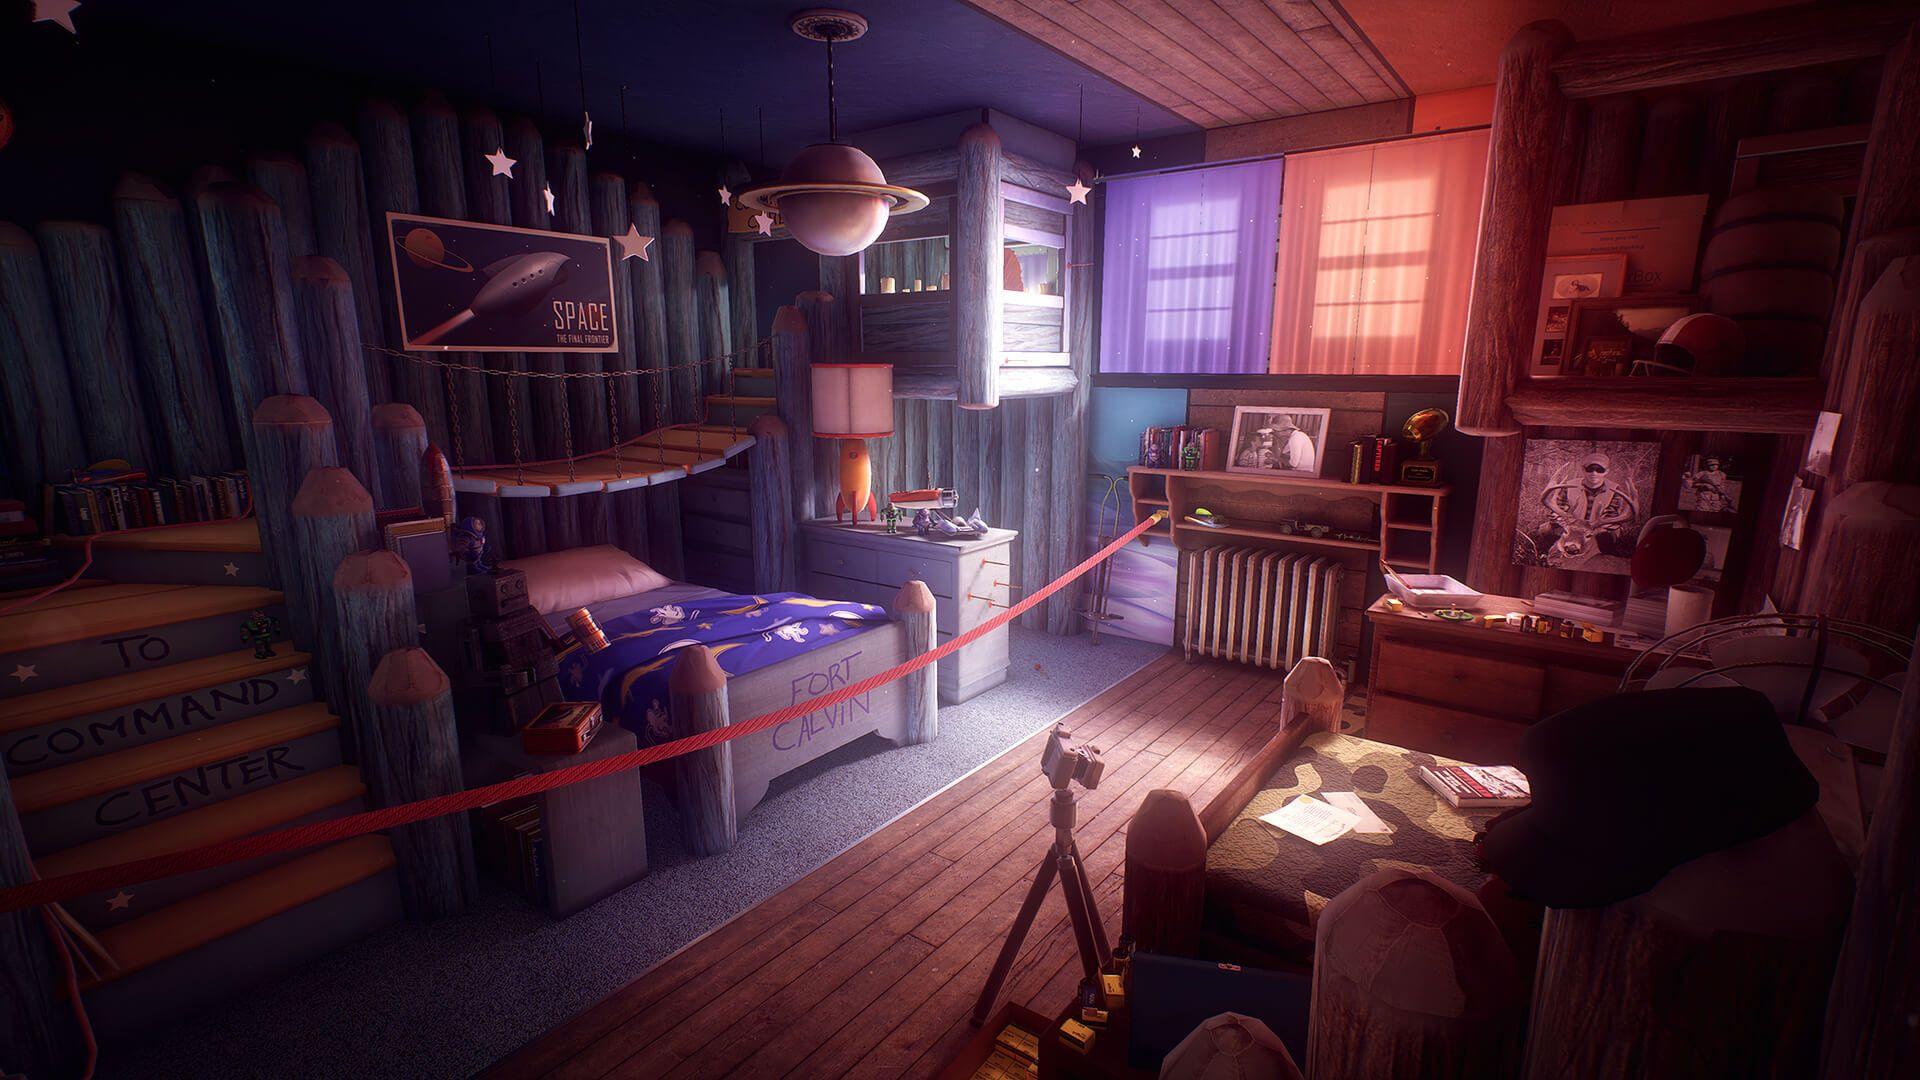 Review: What Remains of Edith Finch